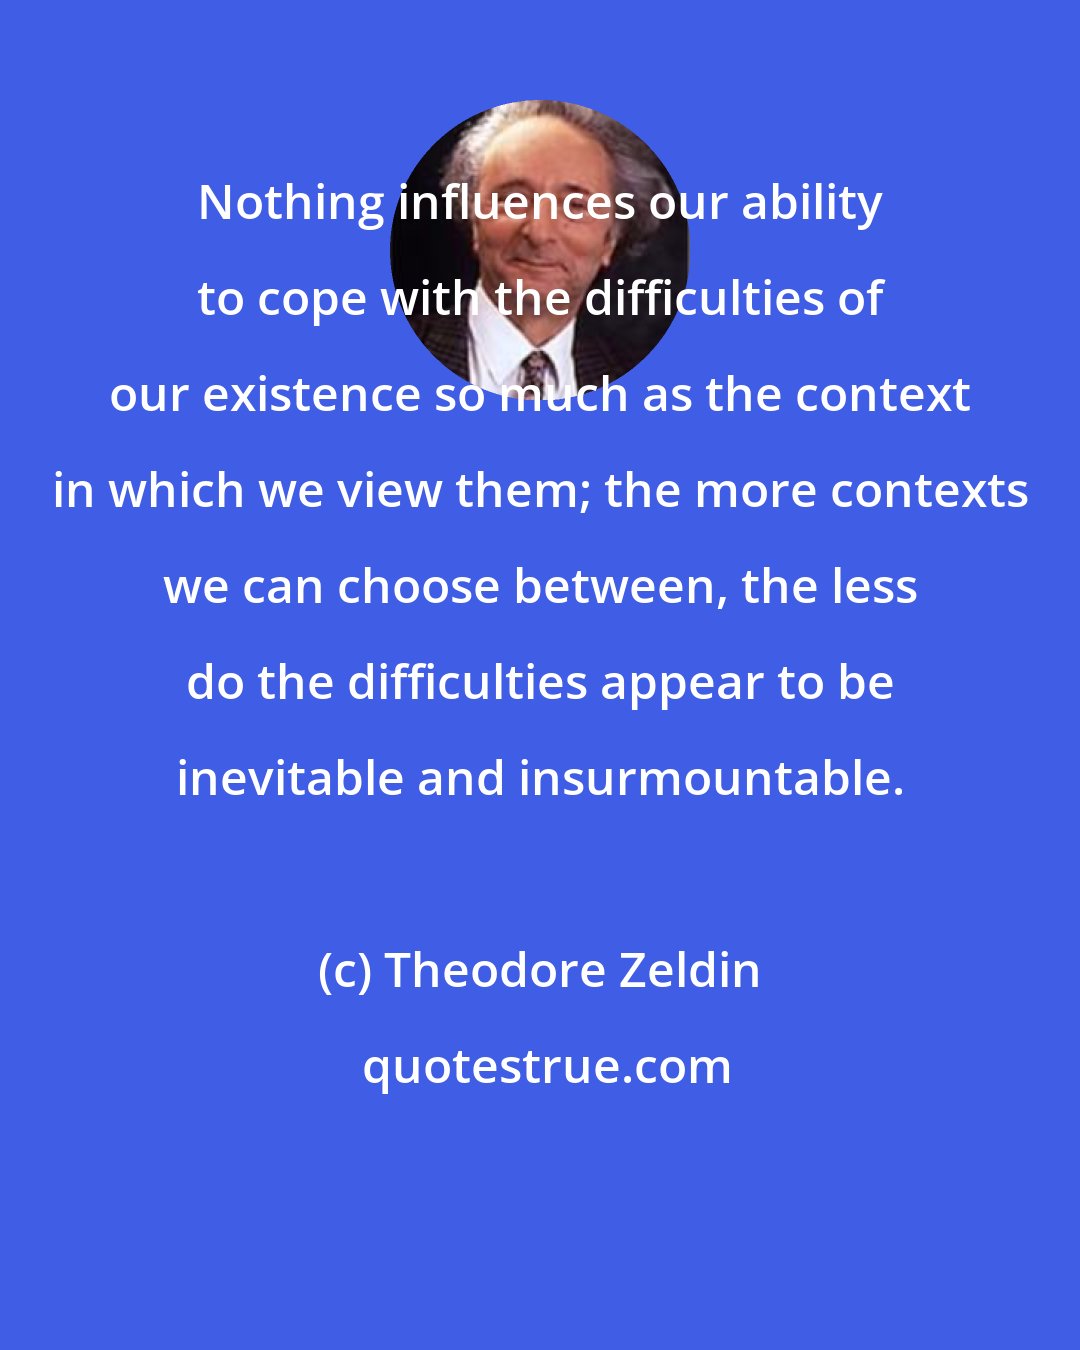 Theodore Zeldin: Nothing influences our ability to cope with the difficulties of our existence so much as the context in which we view them; the more contexts we can choose between, the less do the difficulties appear to be inevitable and insurmountable.